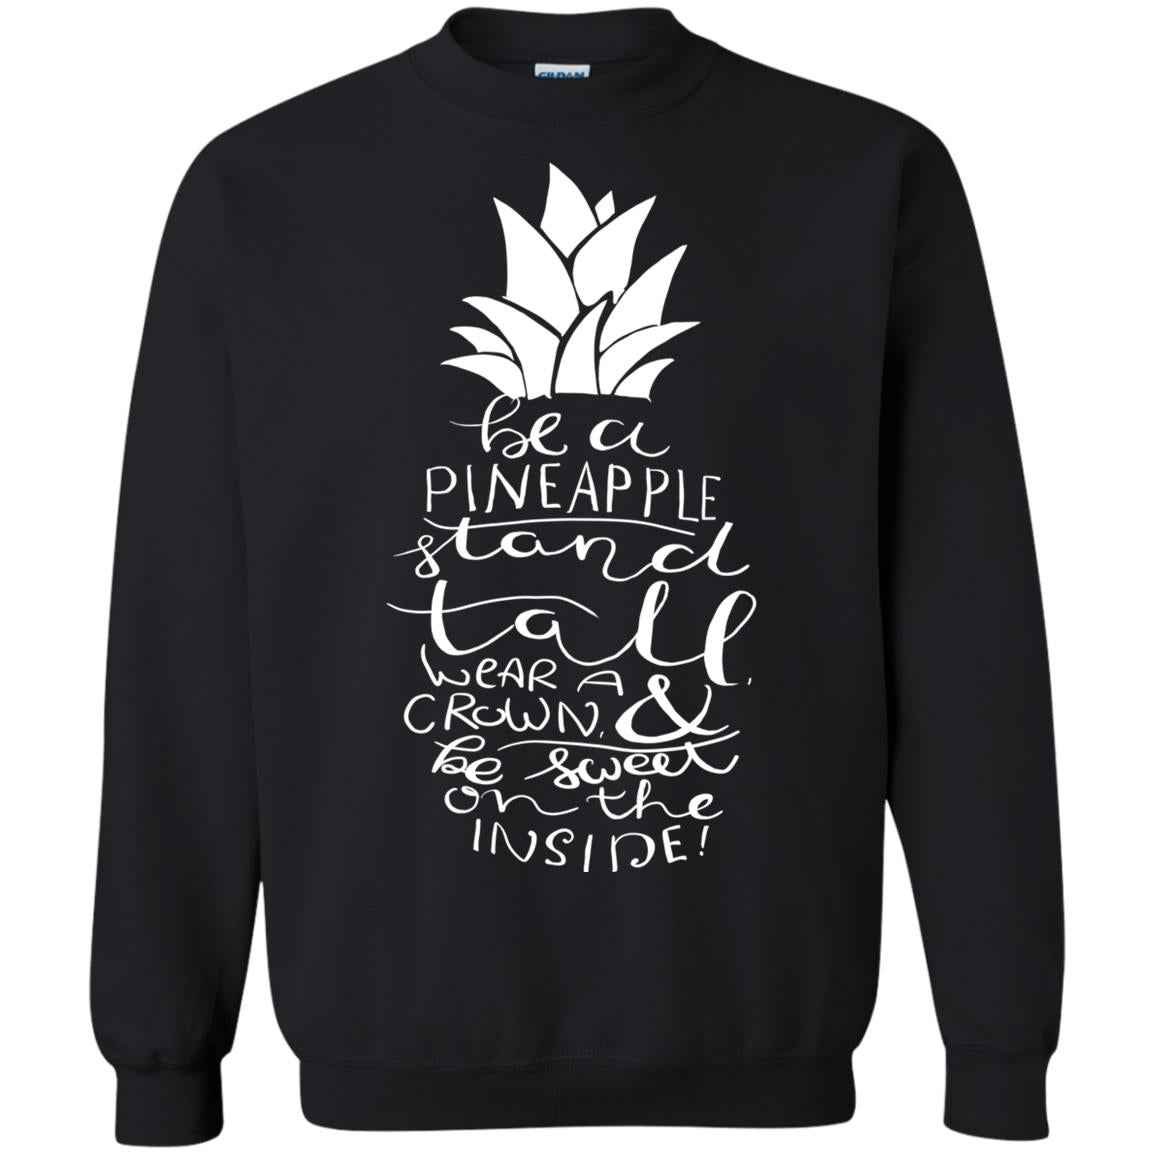 Be A Pineapple Stand Tall Wear A Crown And Be Sweet On The Inside Best Quote ShirtG180 Gildan Crewneck Pullover Sweatshirt 8 oz.